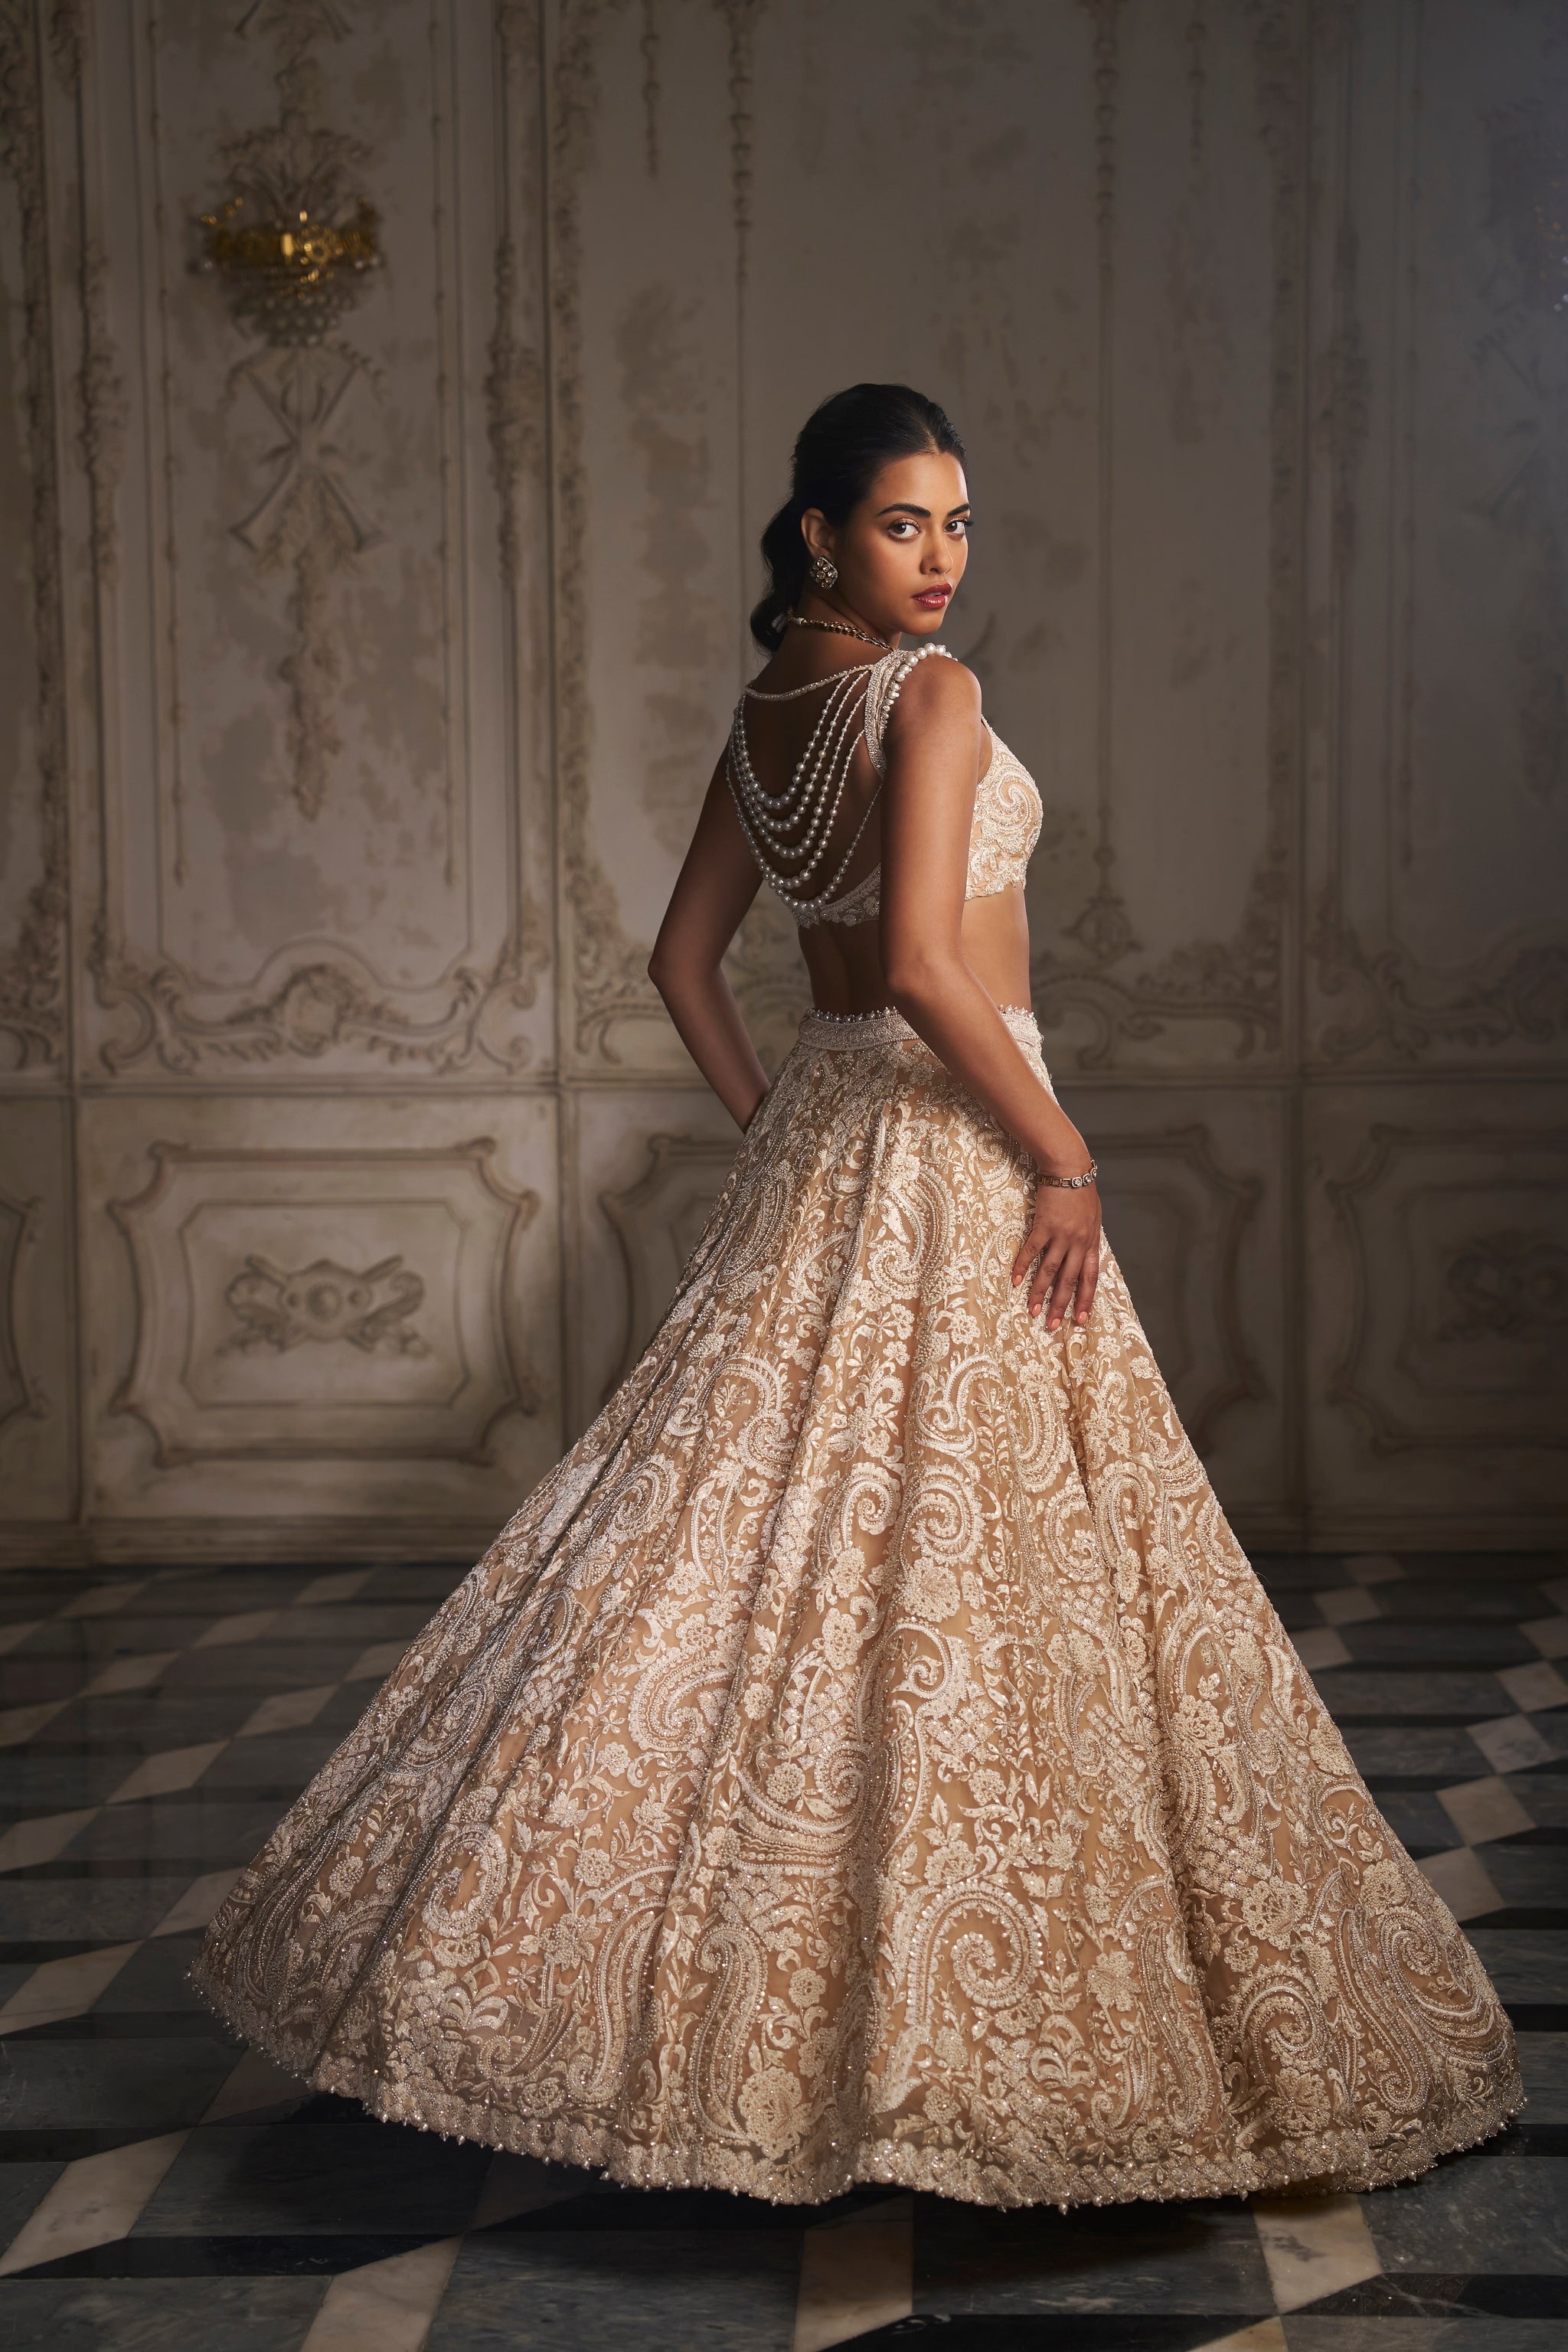 Buy online Gold Indian wedding gown - AD Singh